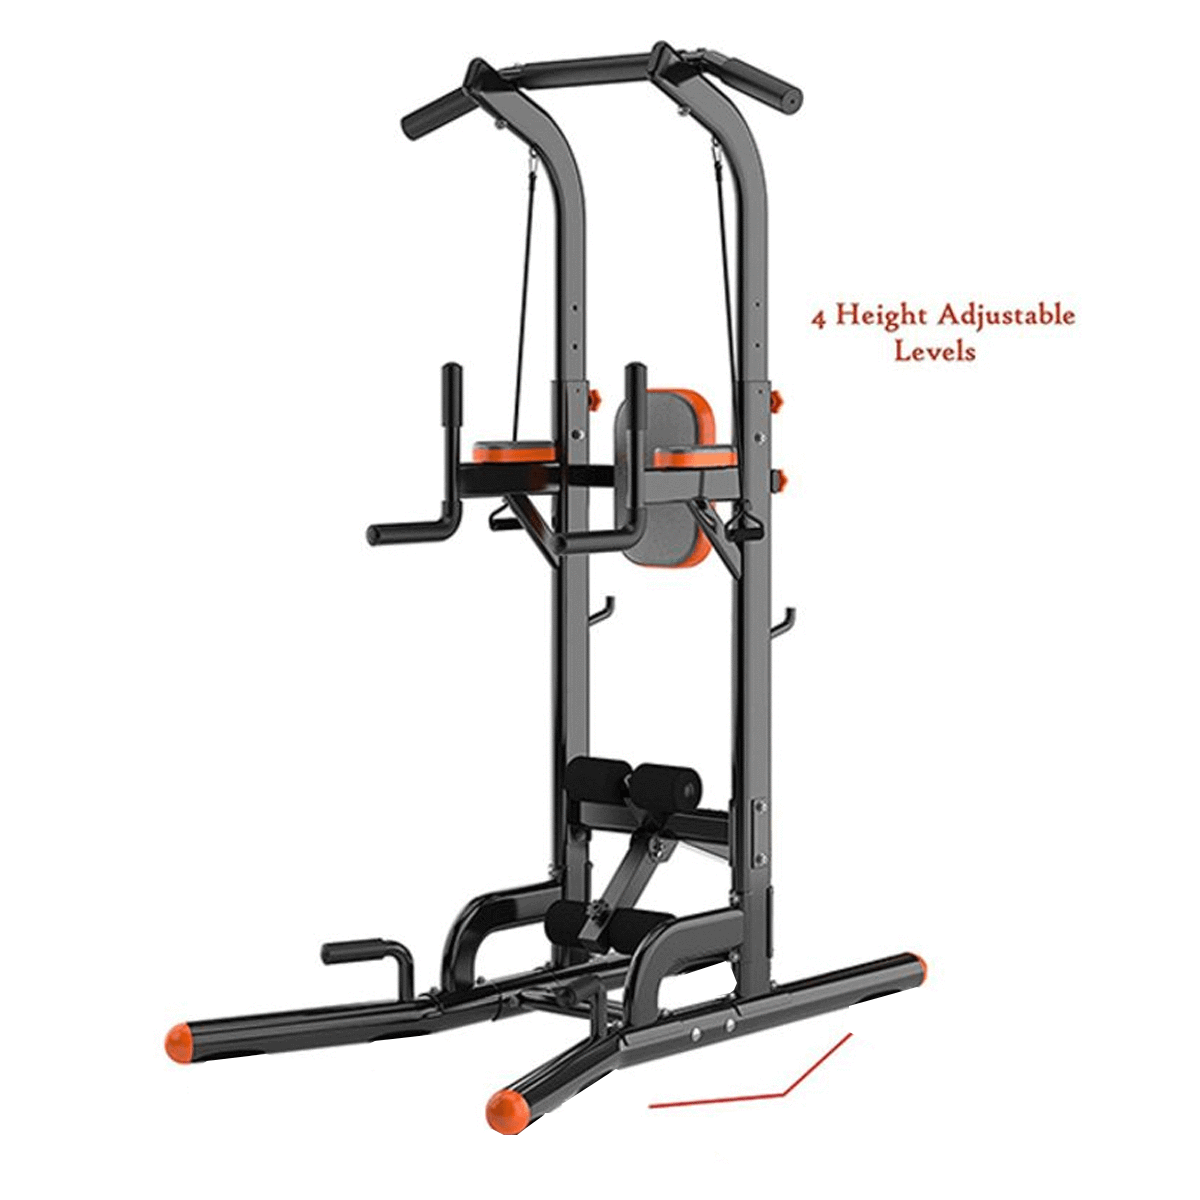 Multi-Function Chin Up Station With Rope And Backrest - SkyLand - SnapZapp